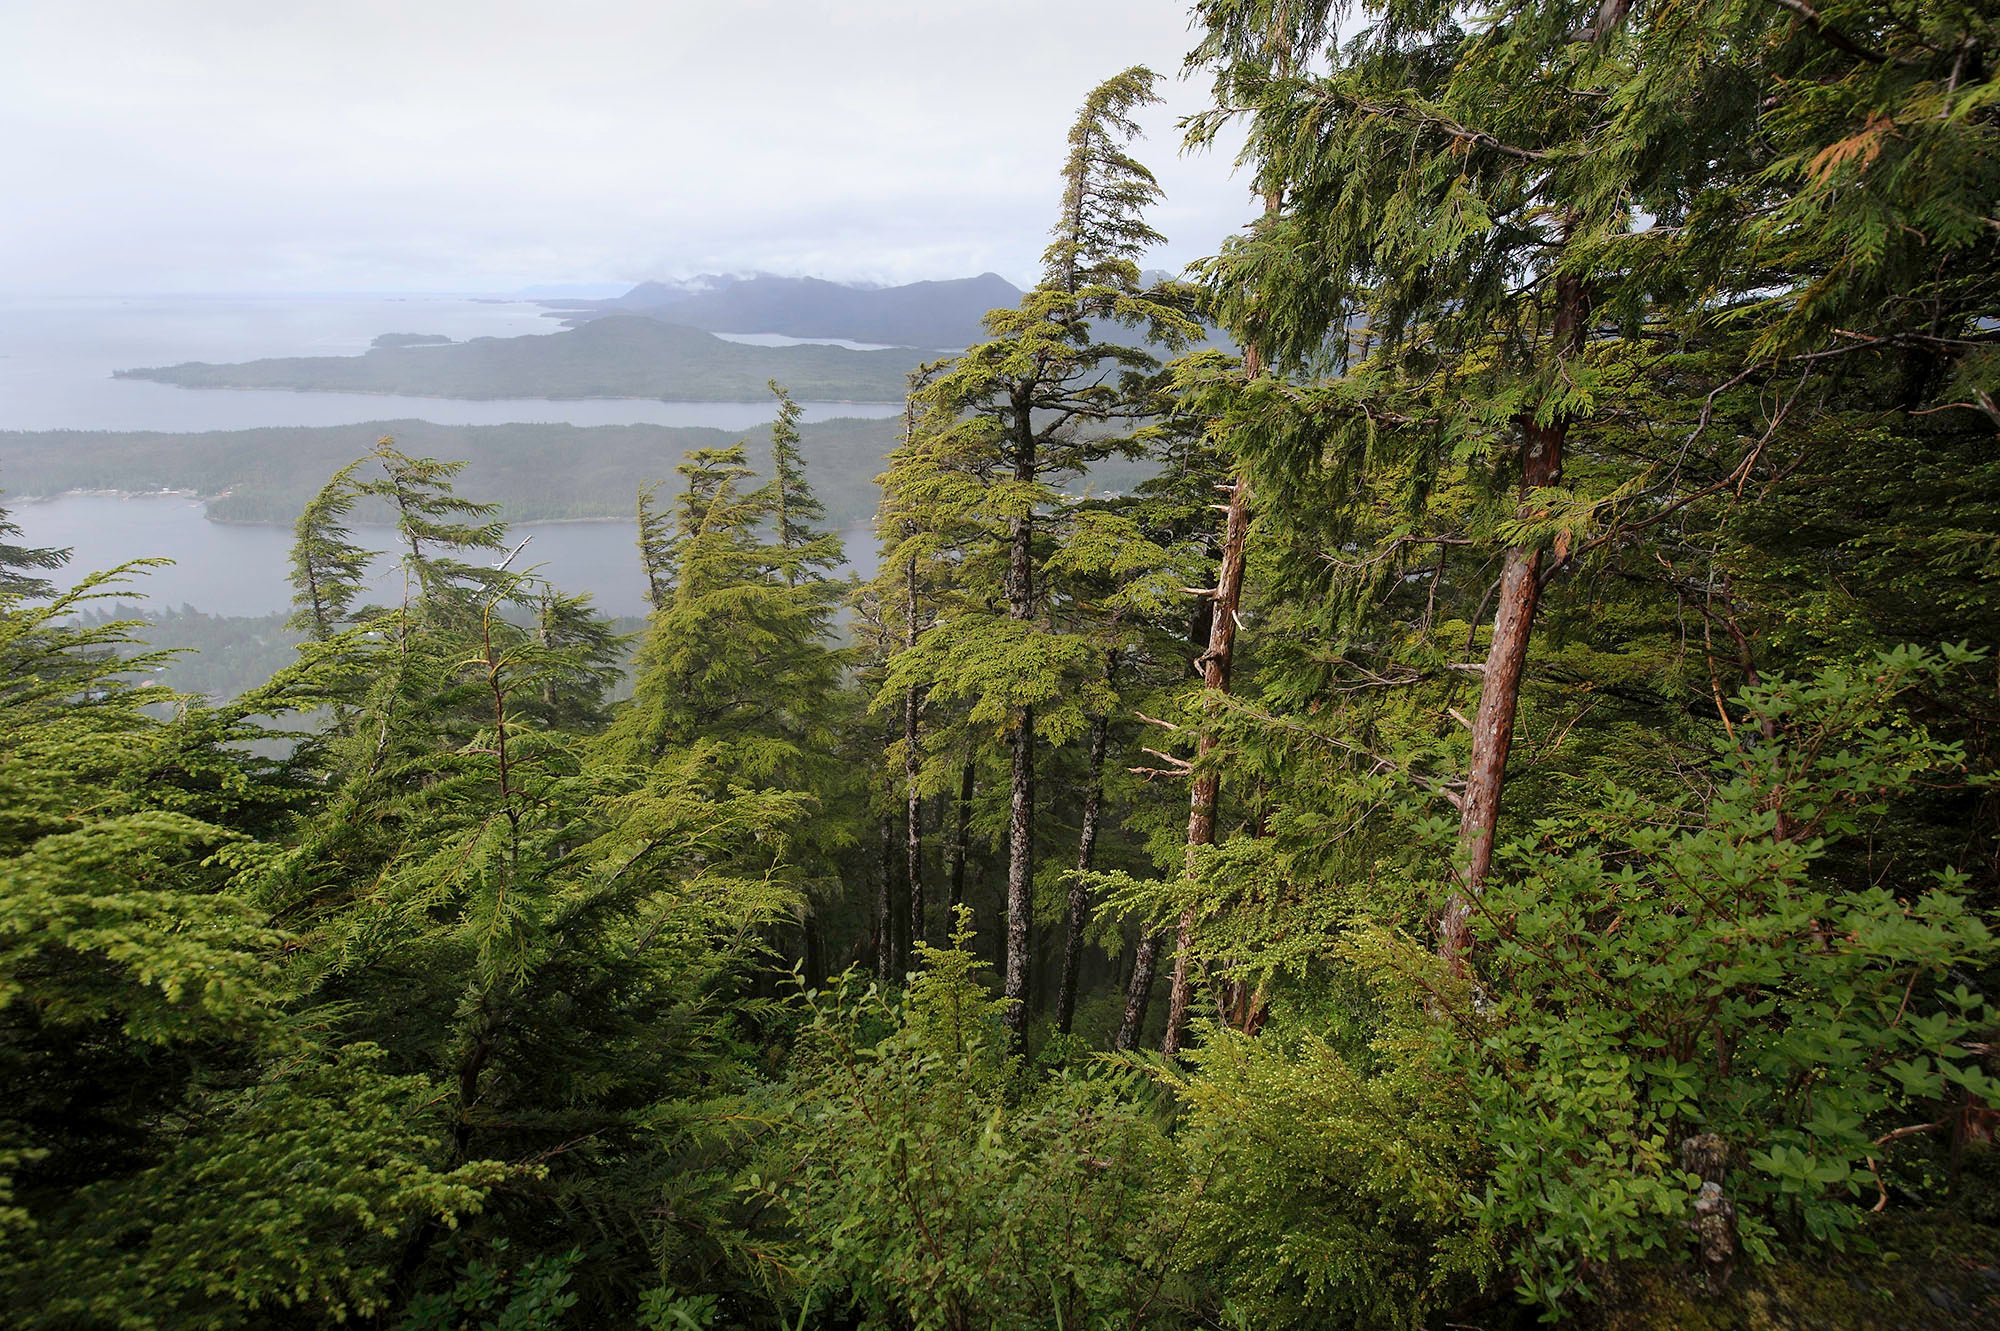 Tall trees in the foreground on a hill, overlooking islands and water in the background.